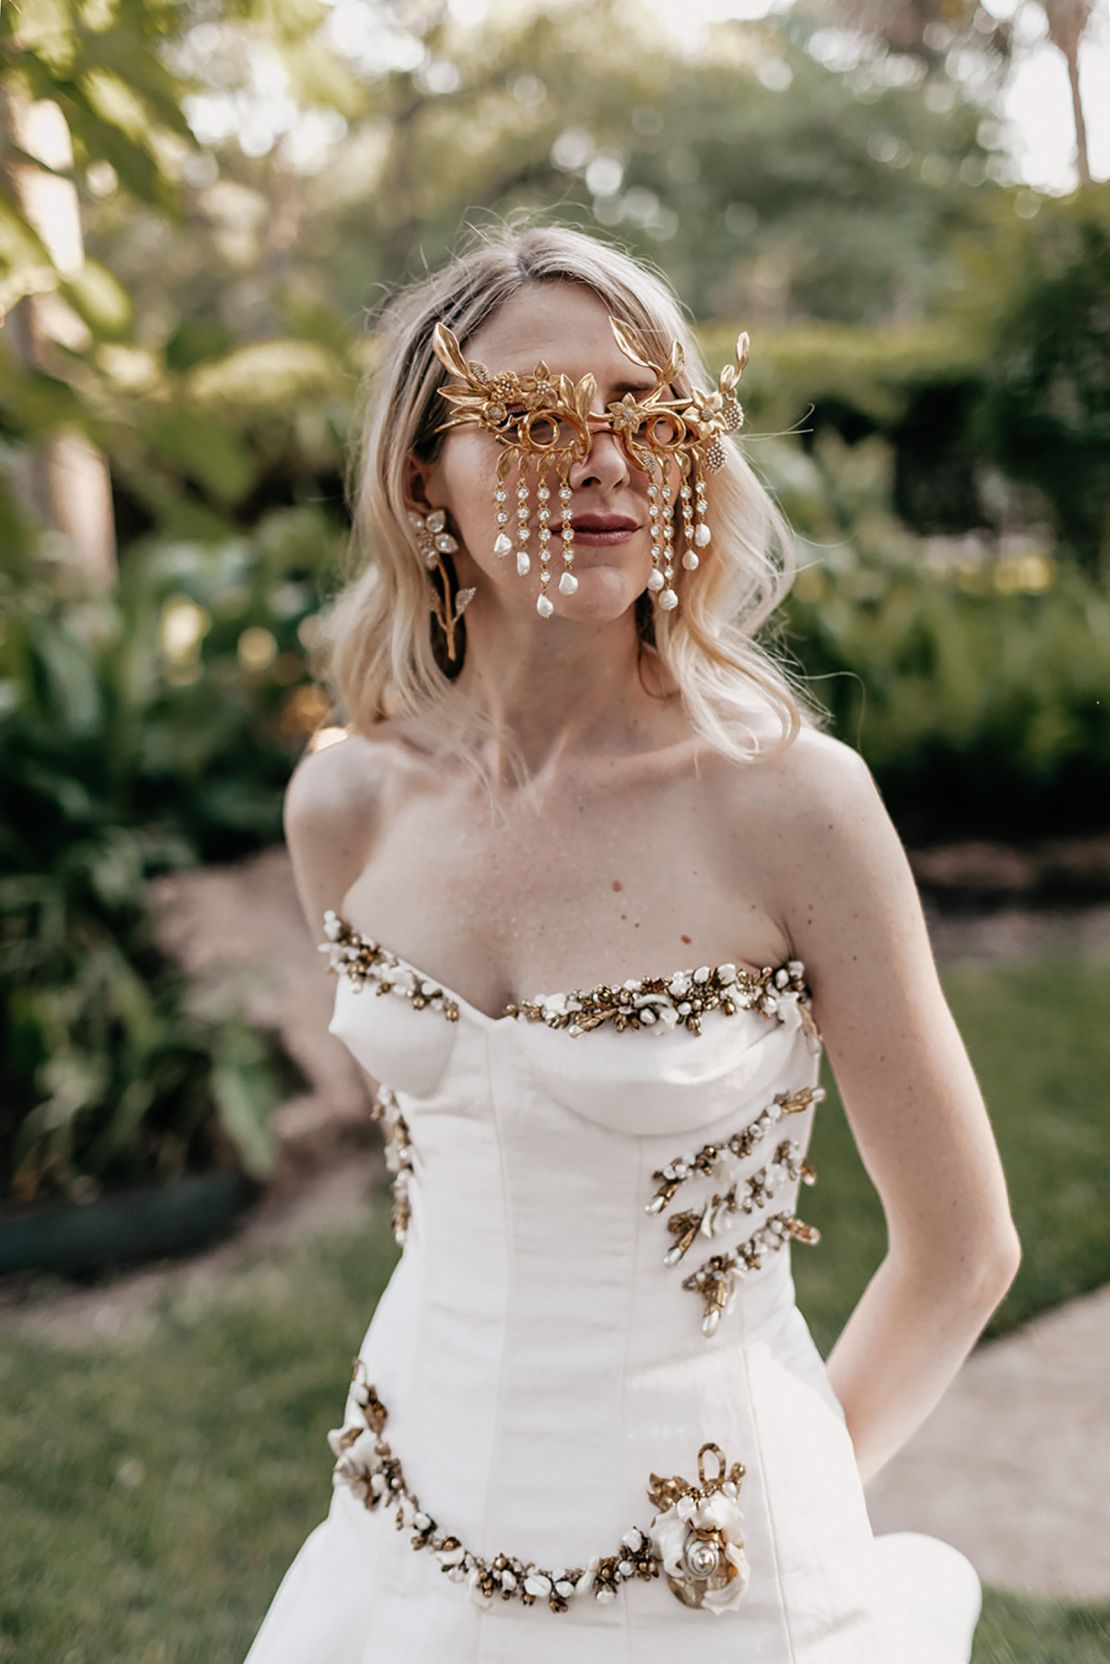 Schiaparelli's creative director Daniel Roseberry designed a dress for his sister Liz to wear at her wedding, adding a touch of his signature surreal style with these glasses.